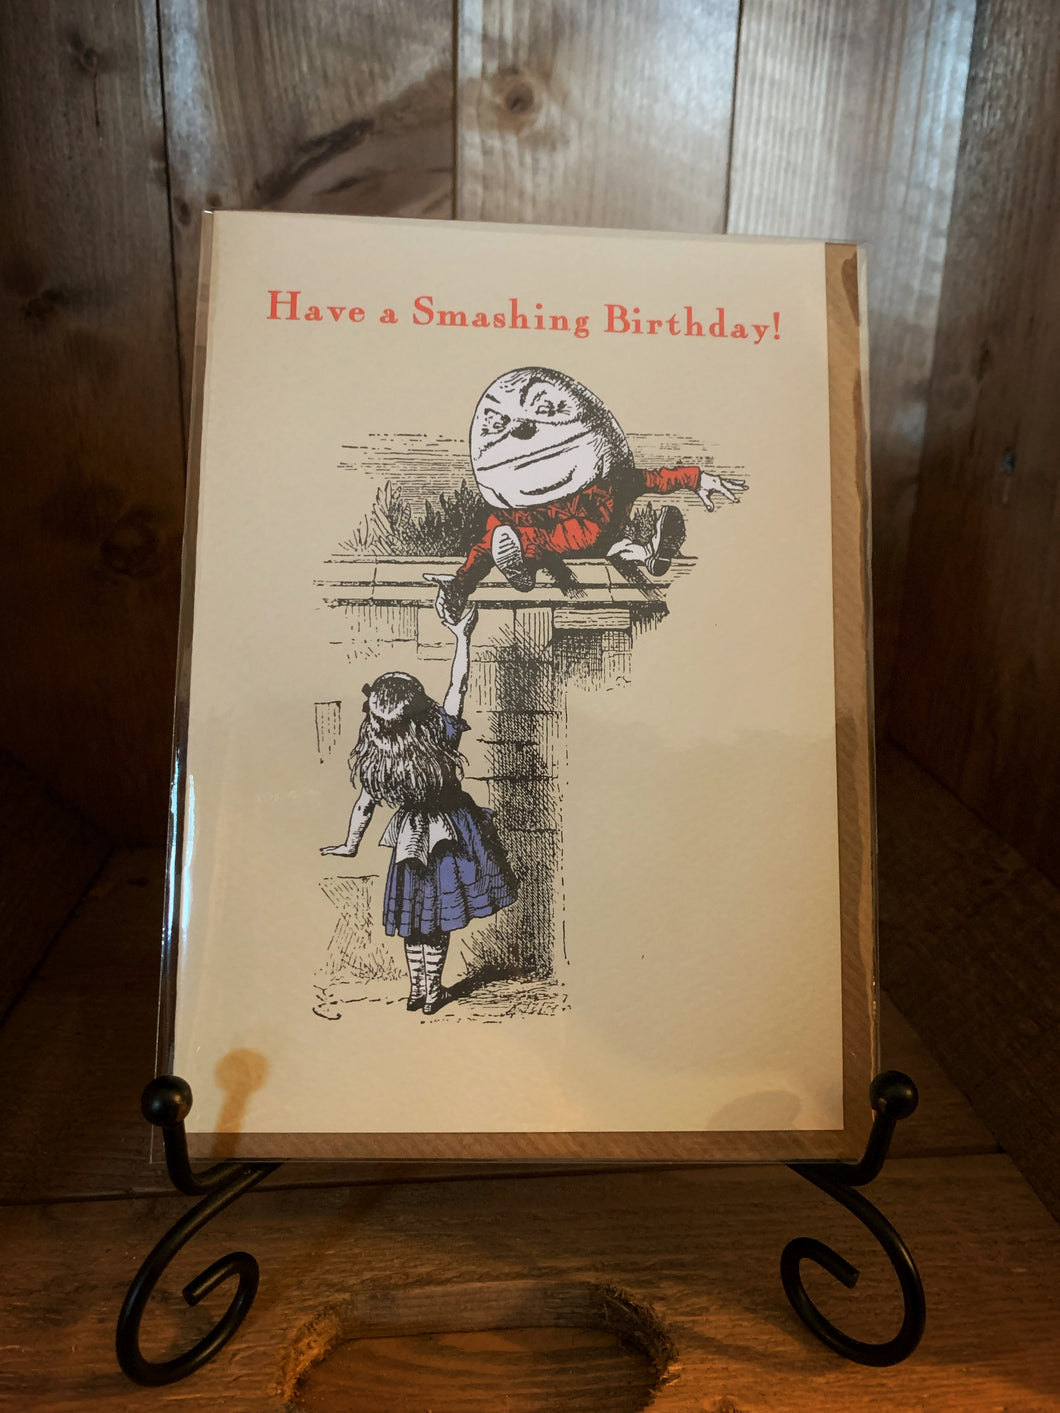 Image shows the greetings cards Alice Humpty Dumpty Birthday with a taupe background and a black and white illustration of Alice with Humpty Dumpty wearing blue and red outfits and the words 'Have a Smashing Birthday!' across the top